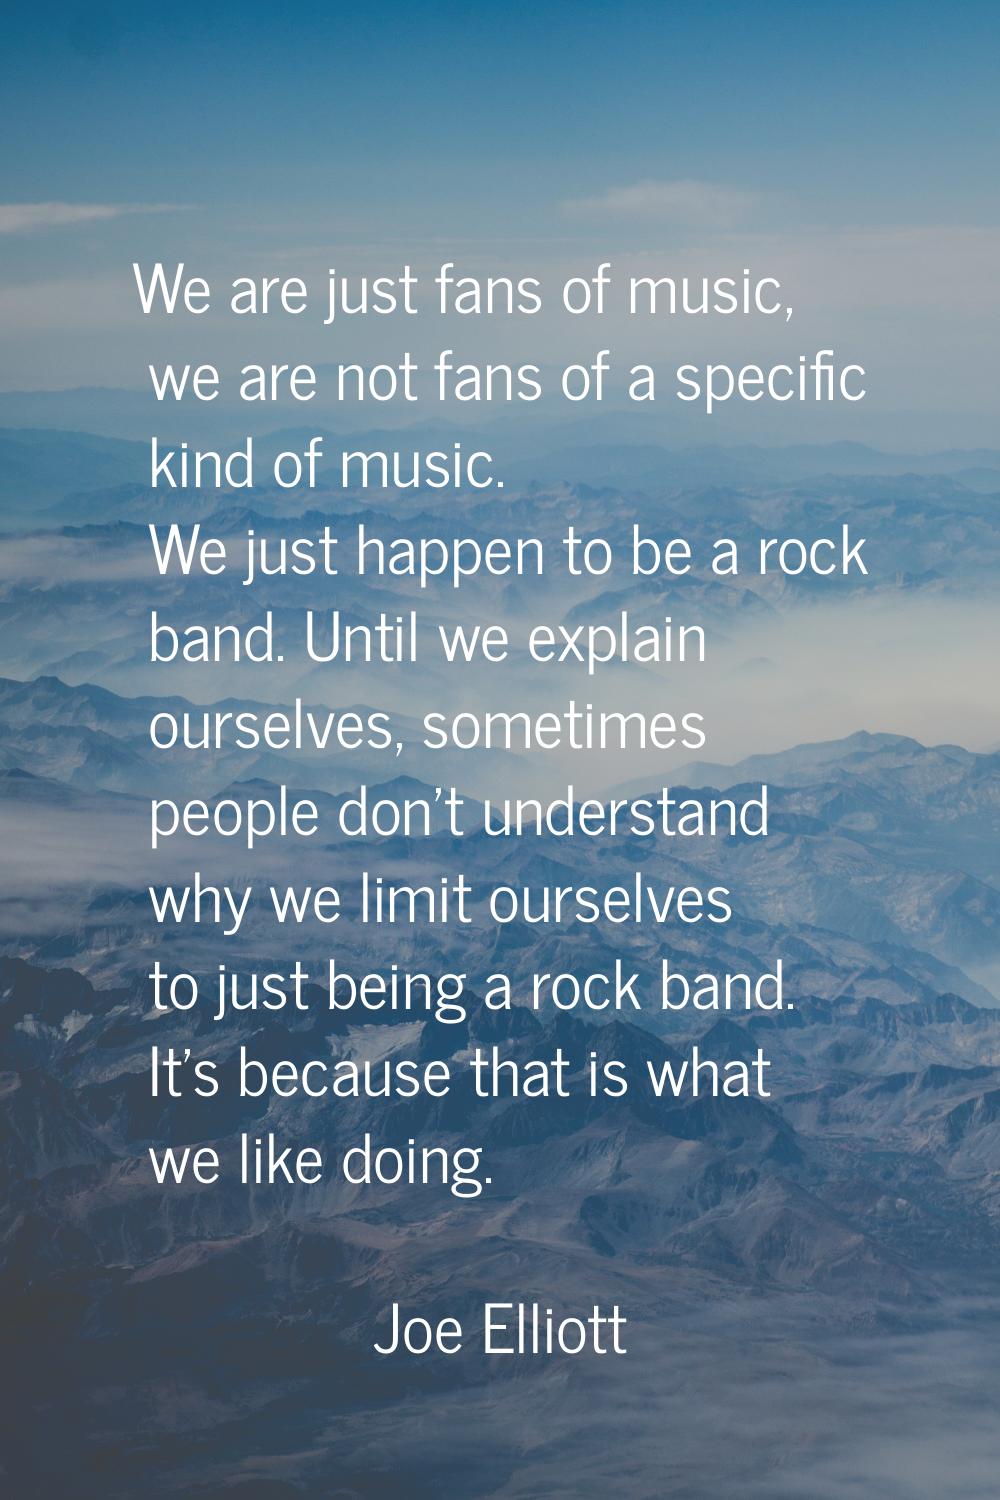 We are just fans of music, we are not fans of a specific kind of music. We just happen to be a rock